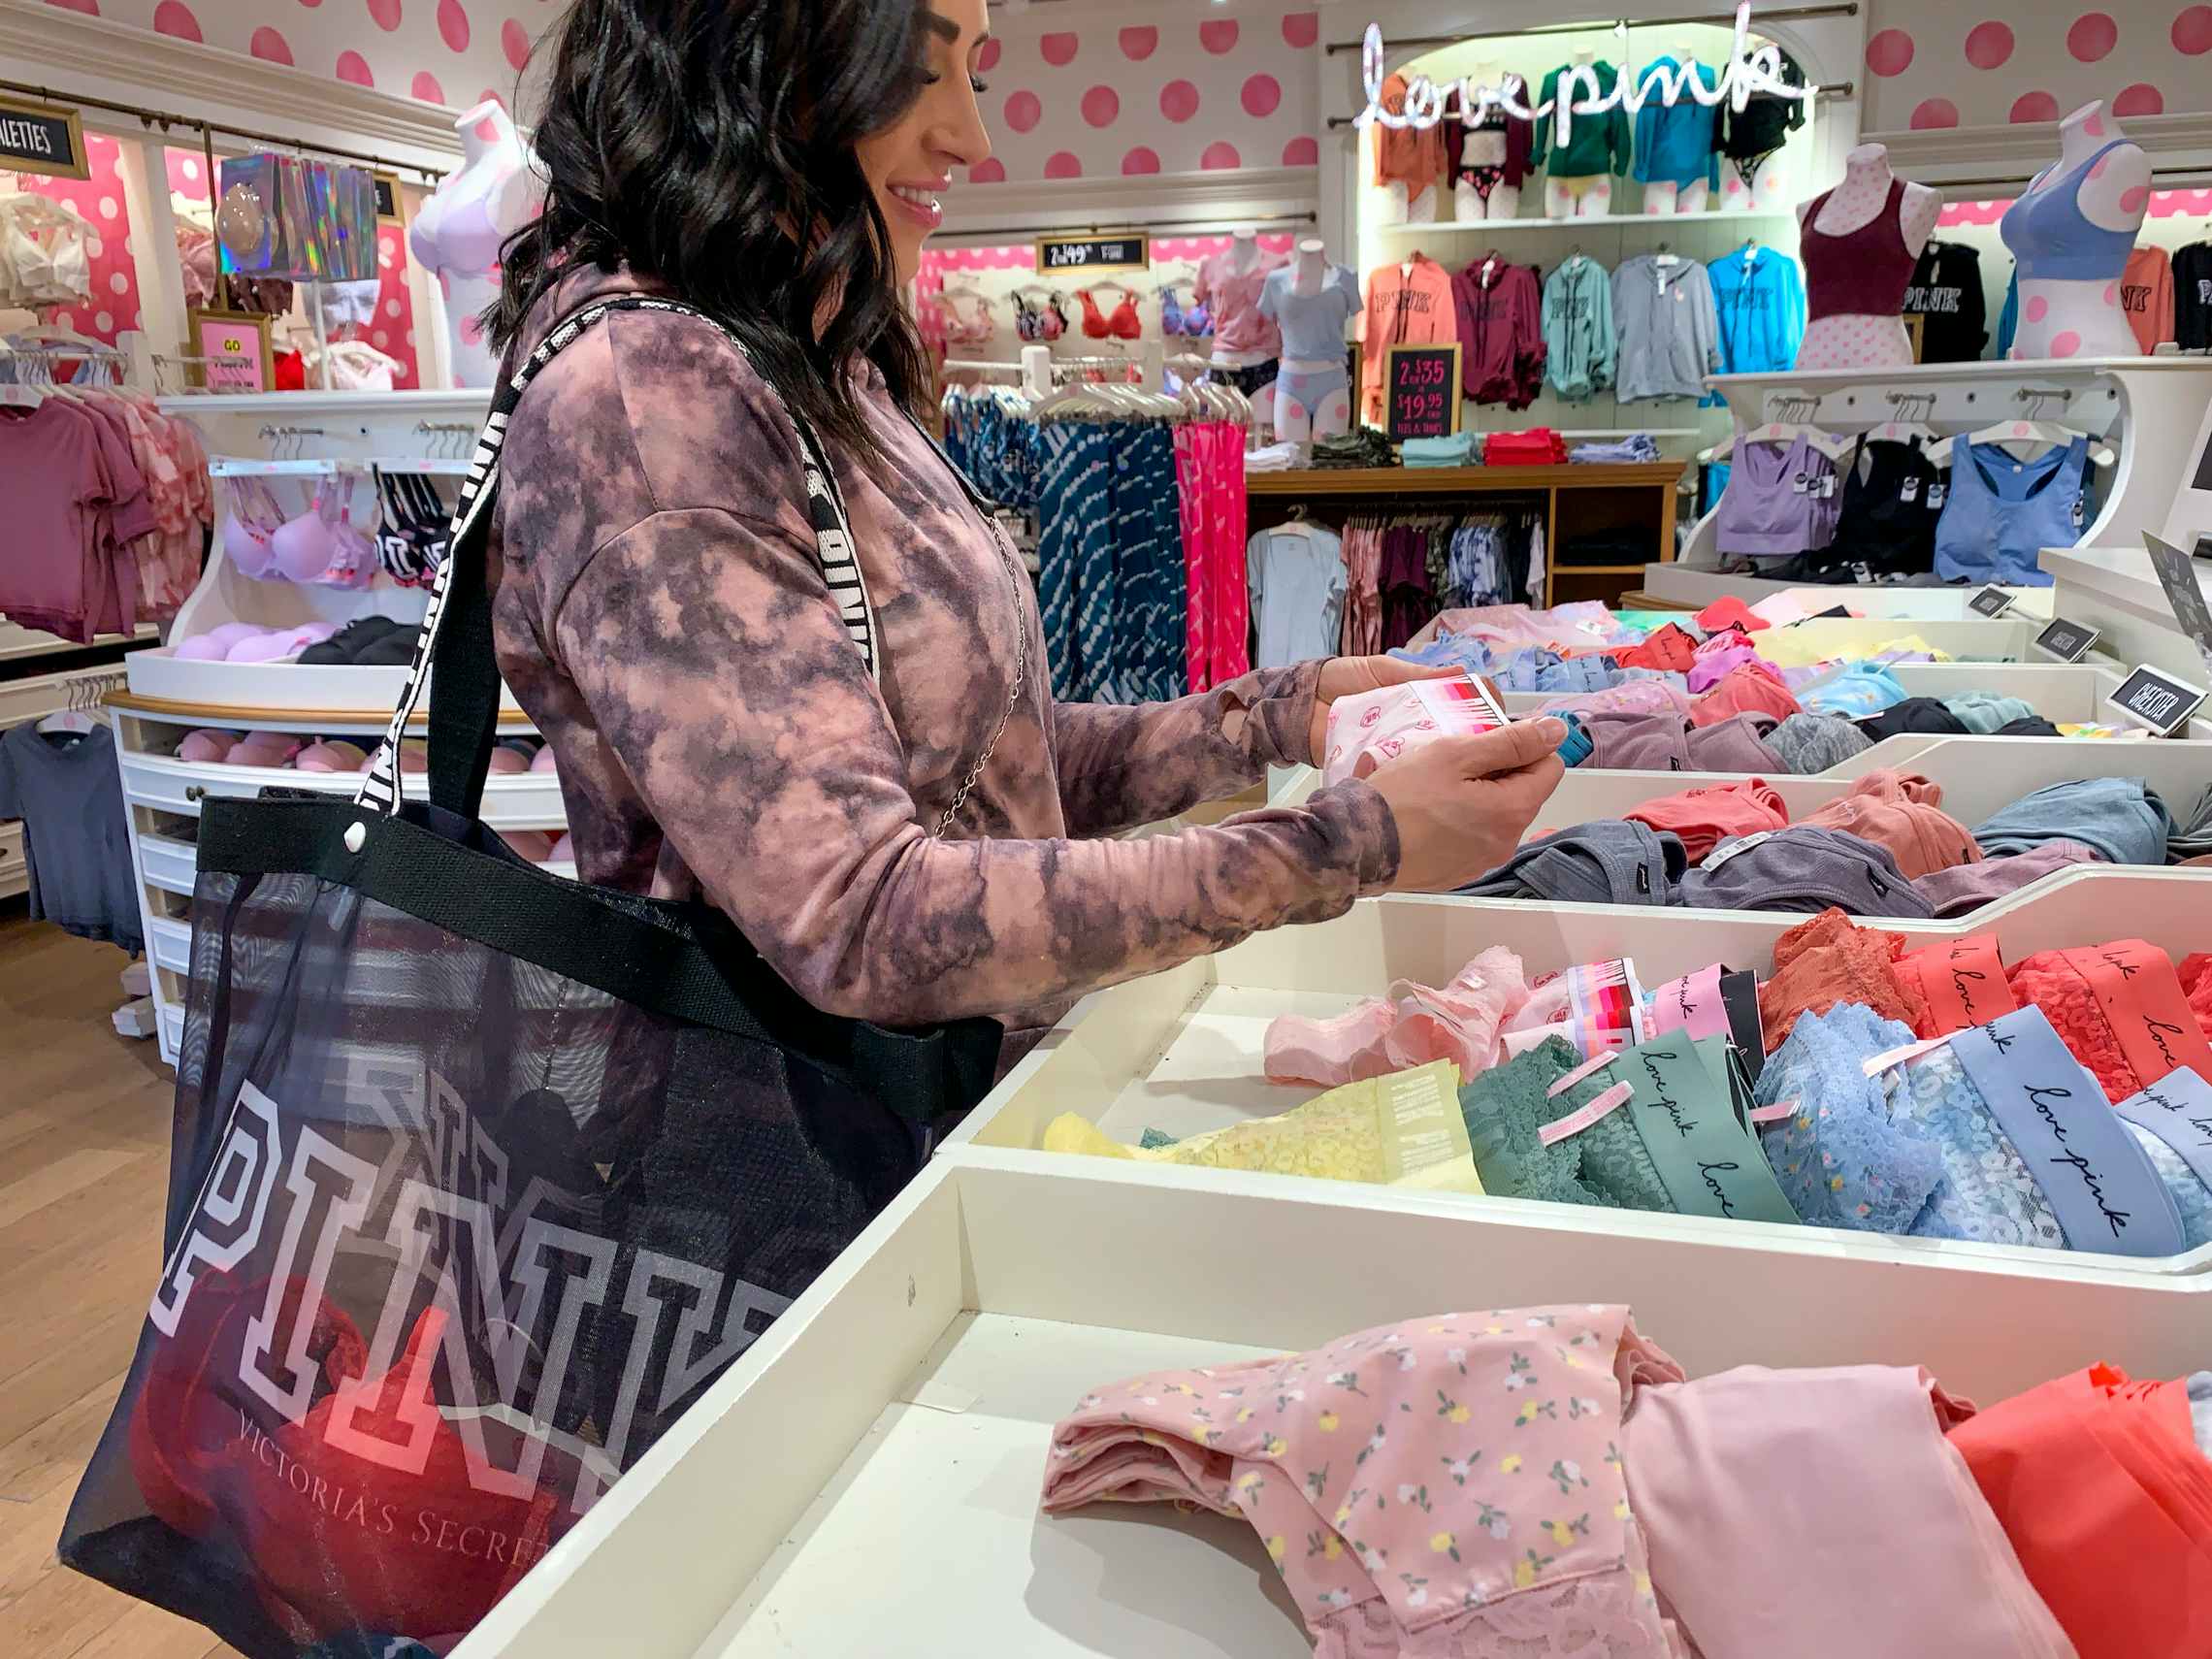 A woman holding Victoria's Secret underwear in hand at the store.